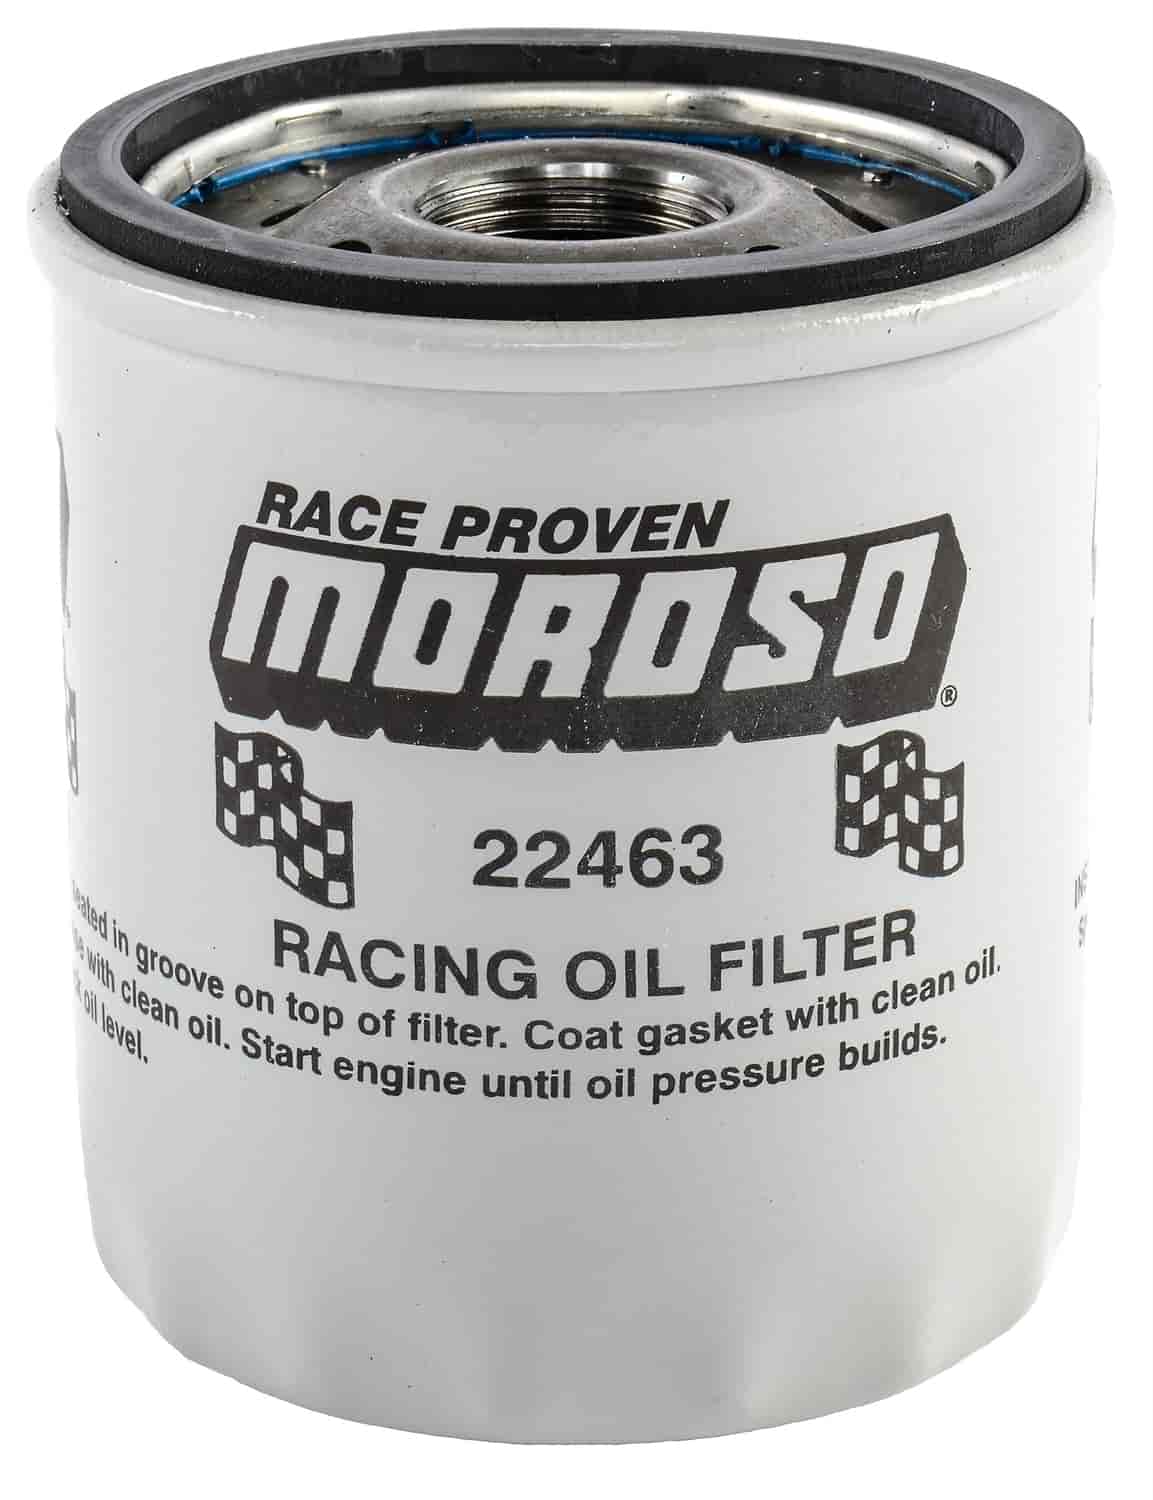 Racing Oil Filter For Ford Modular and GM